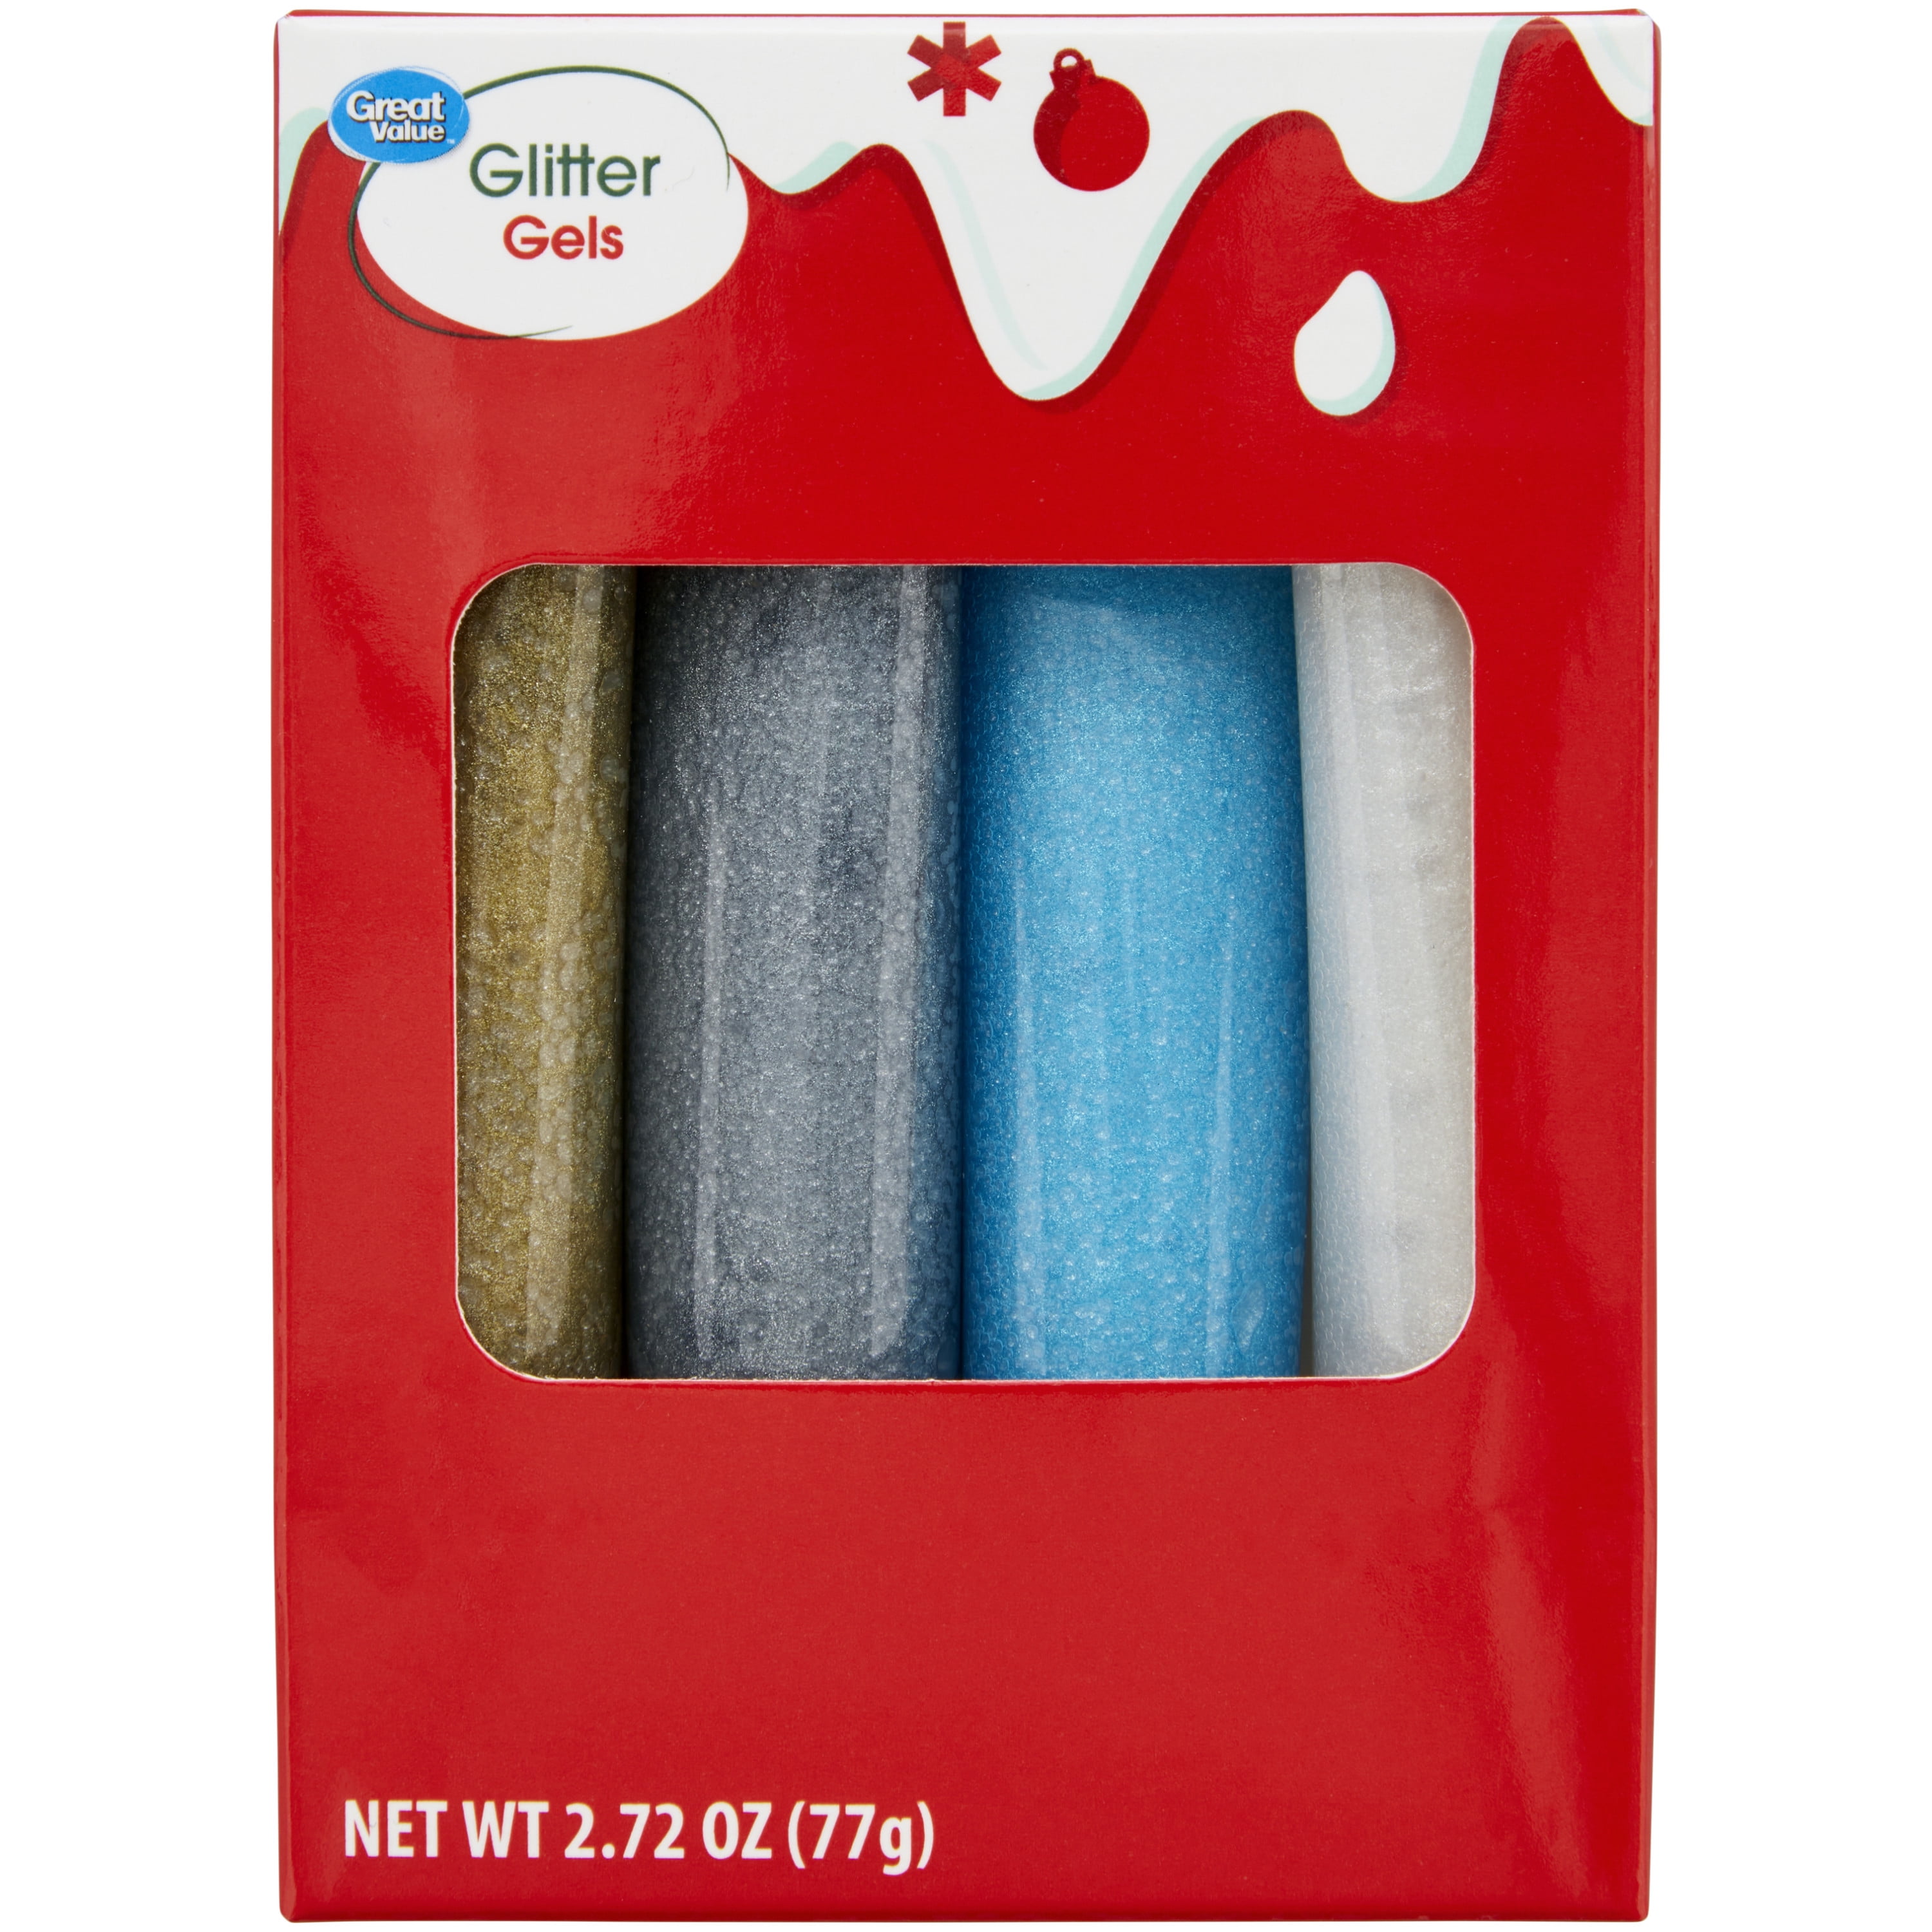 Great Value Silver, Gold, Blue & White Holiday Glitter Gels, 2.72 oz, 4 Count